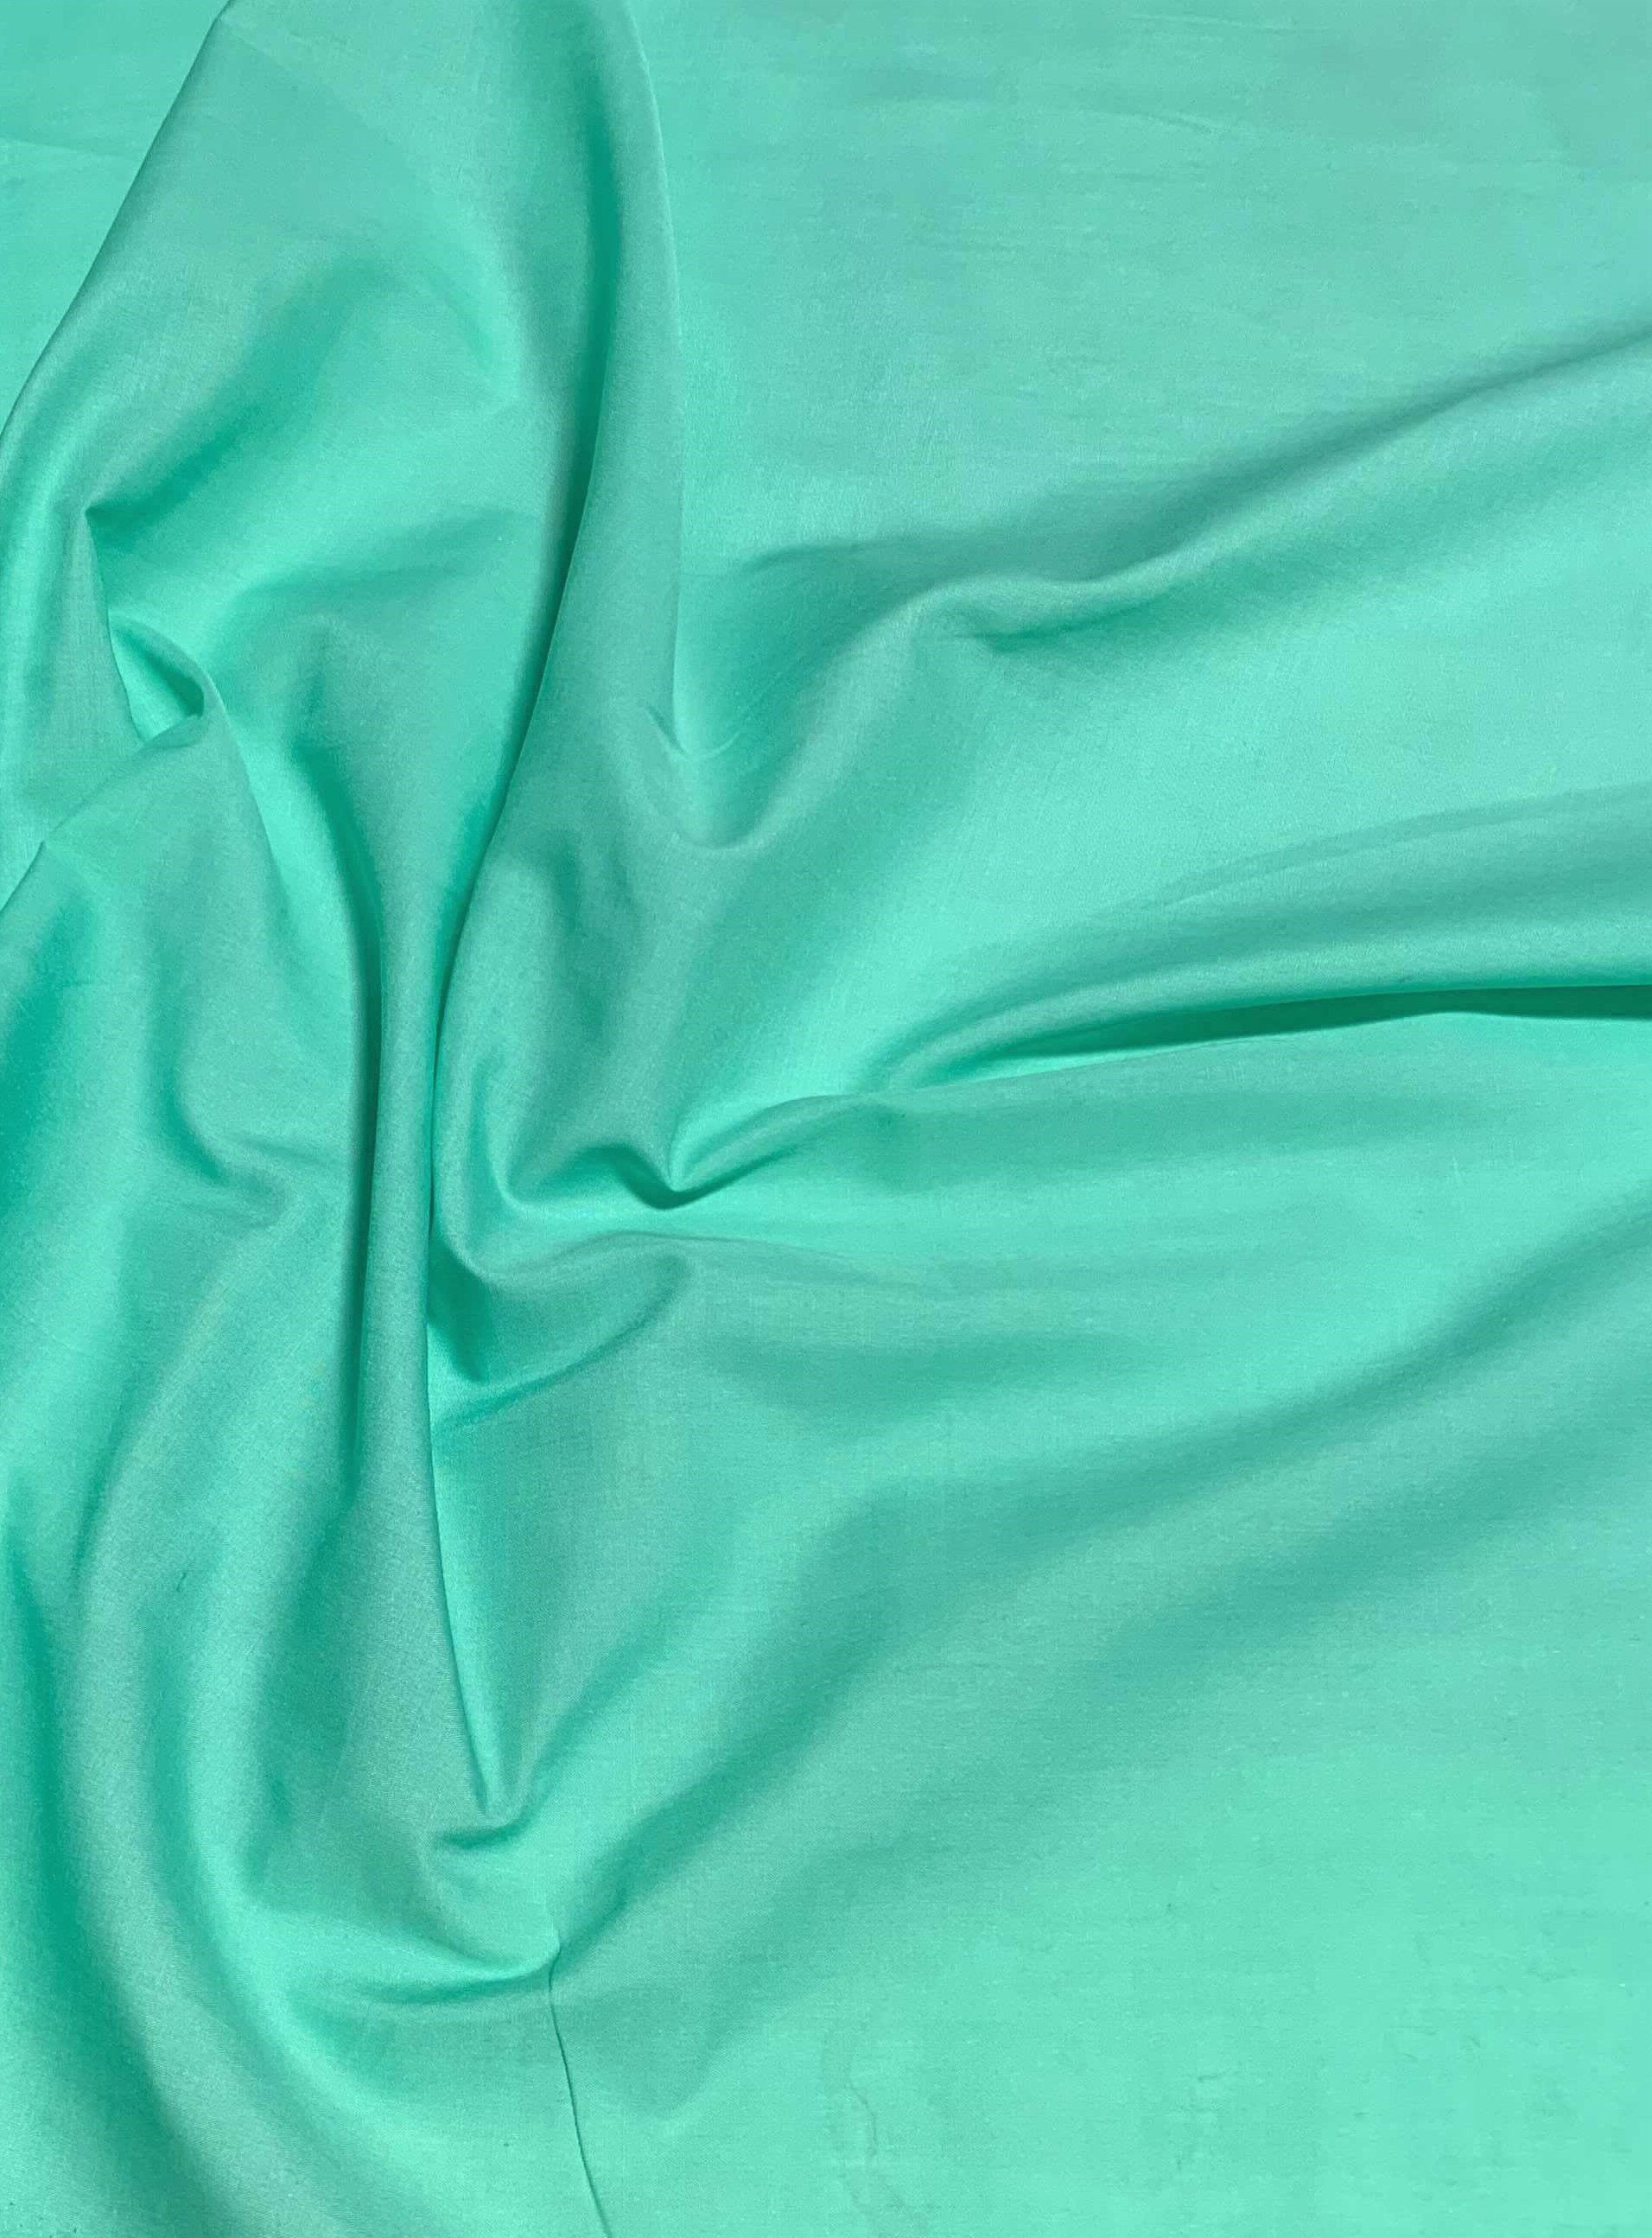 Forest Green Cotton Polyester Broadcloth Fabric Apparel 45 Inches Solid  PolyCotton Per Yard